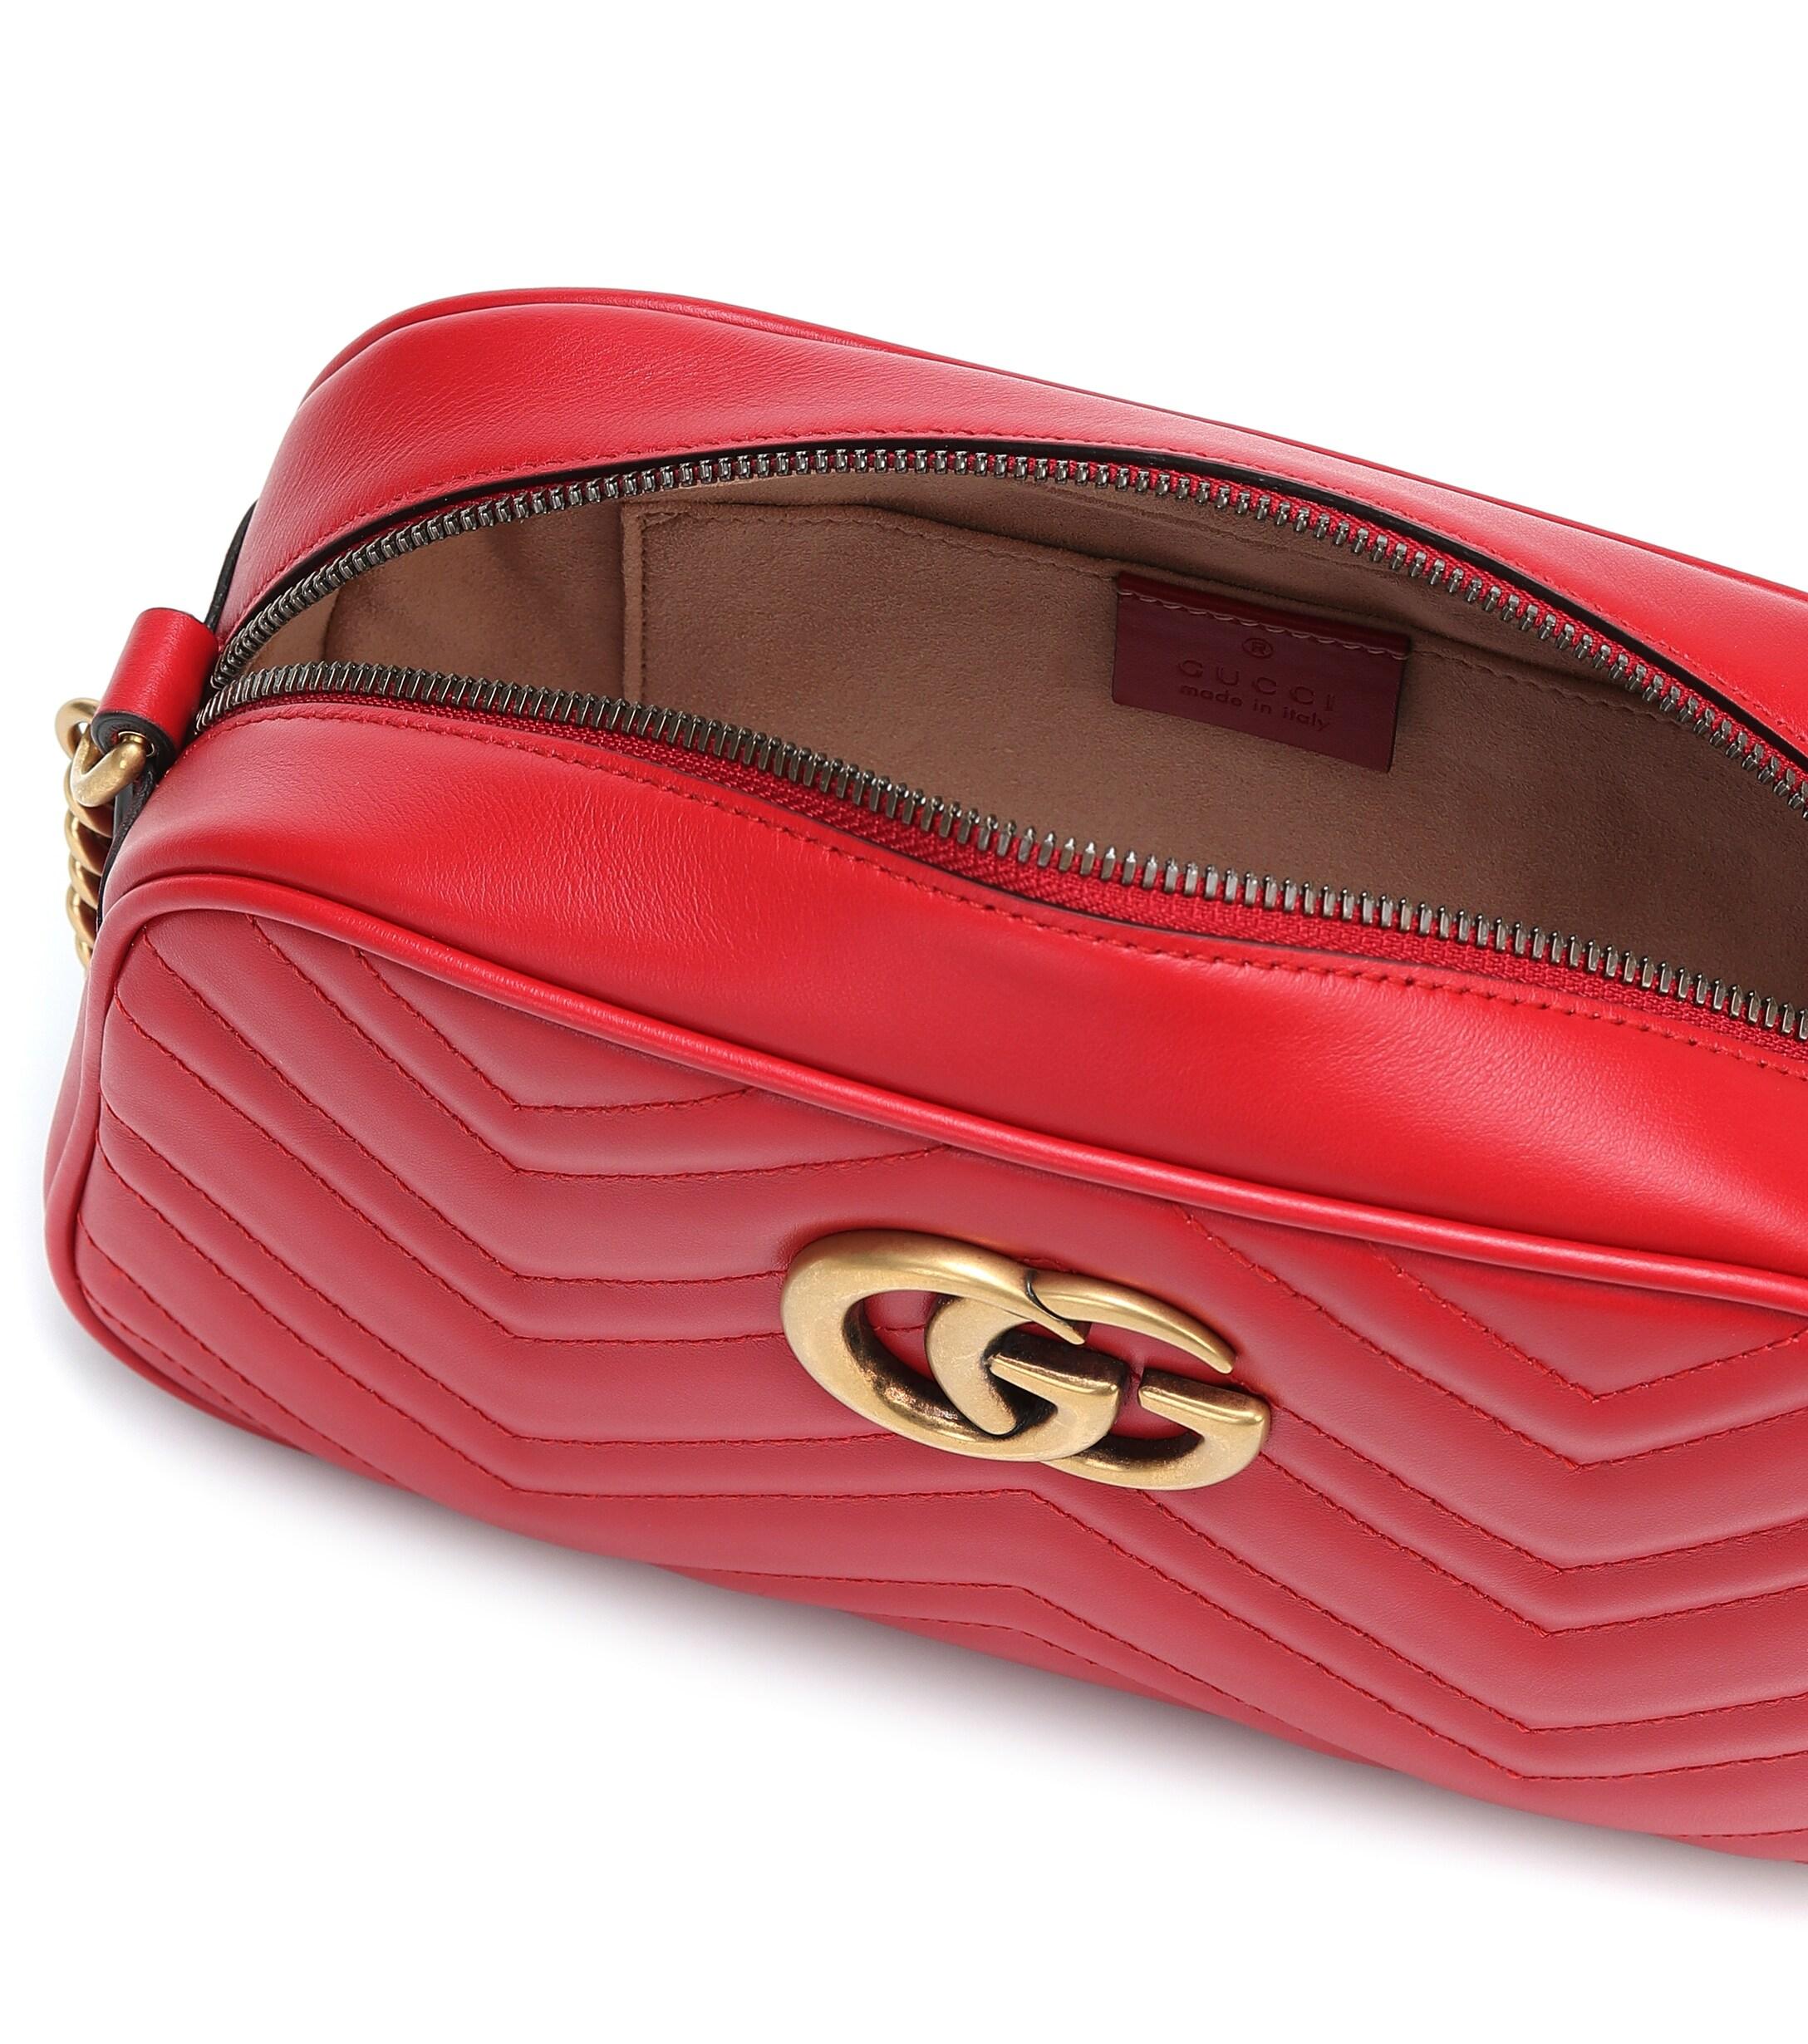 Gucci Synthetic gg Marmont Small Shoulder Bag in Red - Save 19% - Lyst